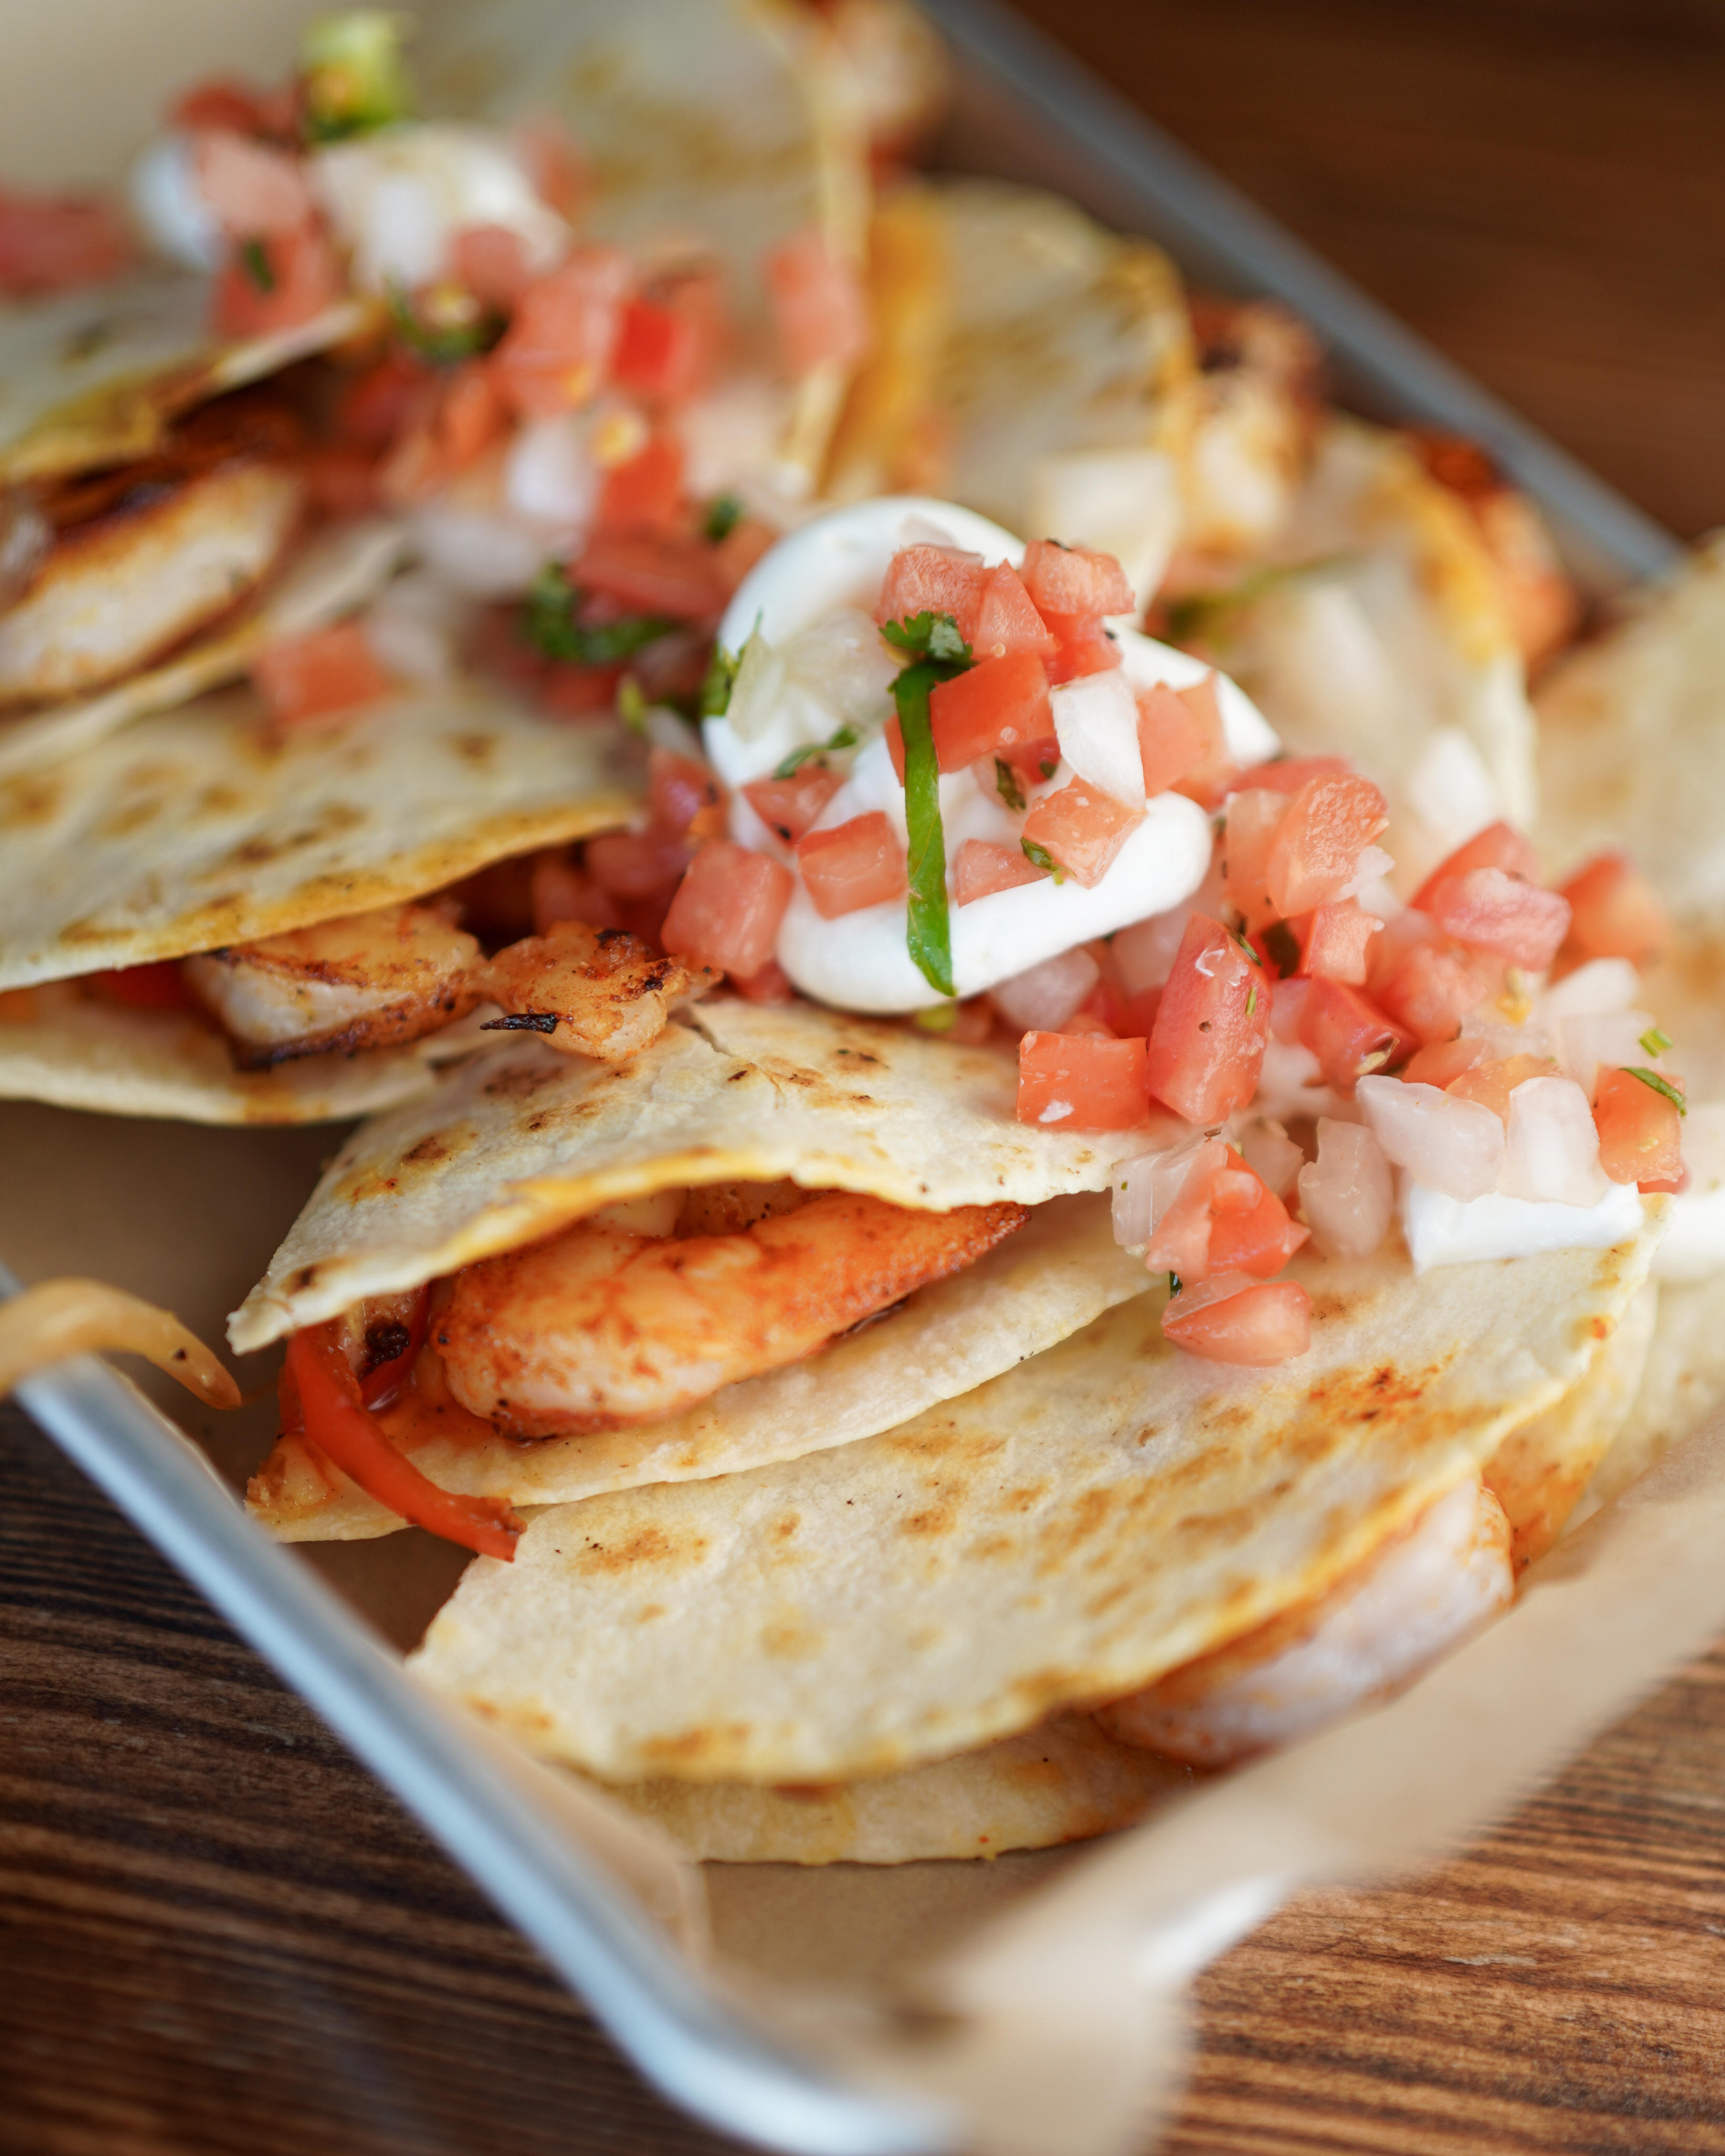 QUESADILLA - Your choice of sautéed shrimp or grilled chicken, with onions, bell peppers and nacho c Joey's Fish Shack Camrose (780)673-0164